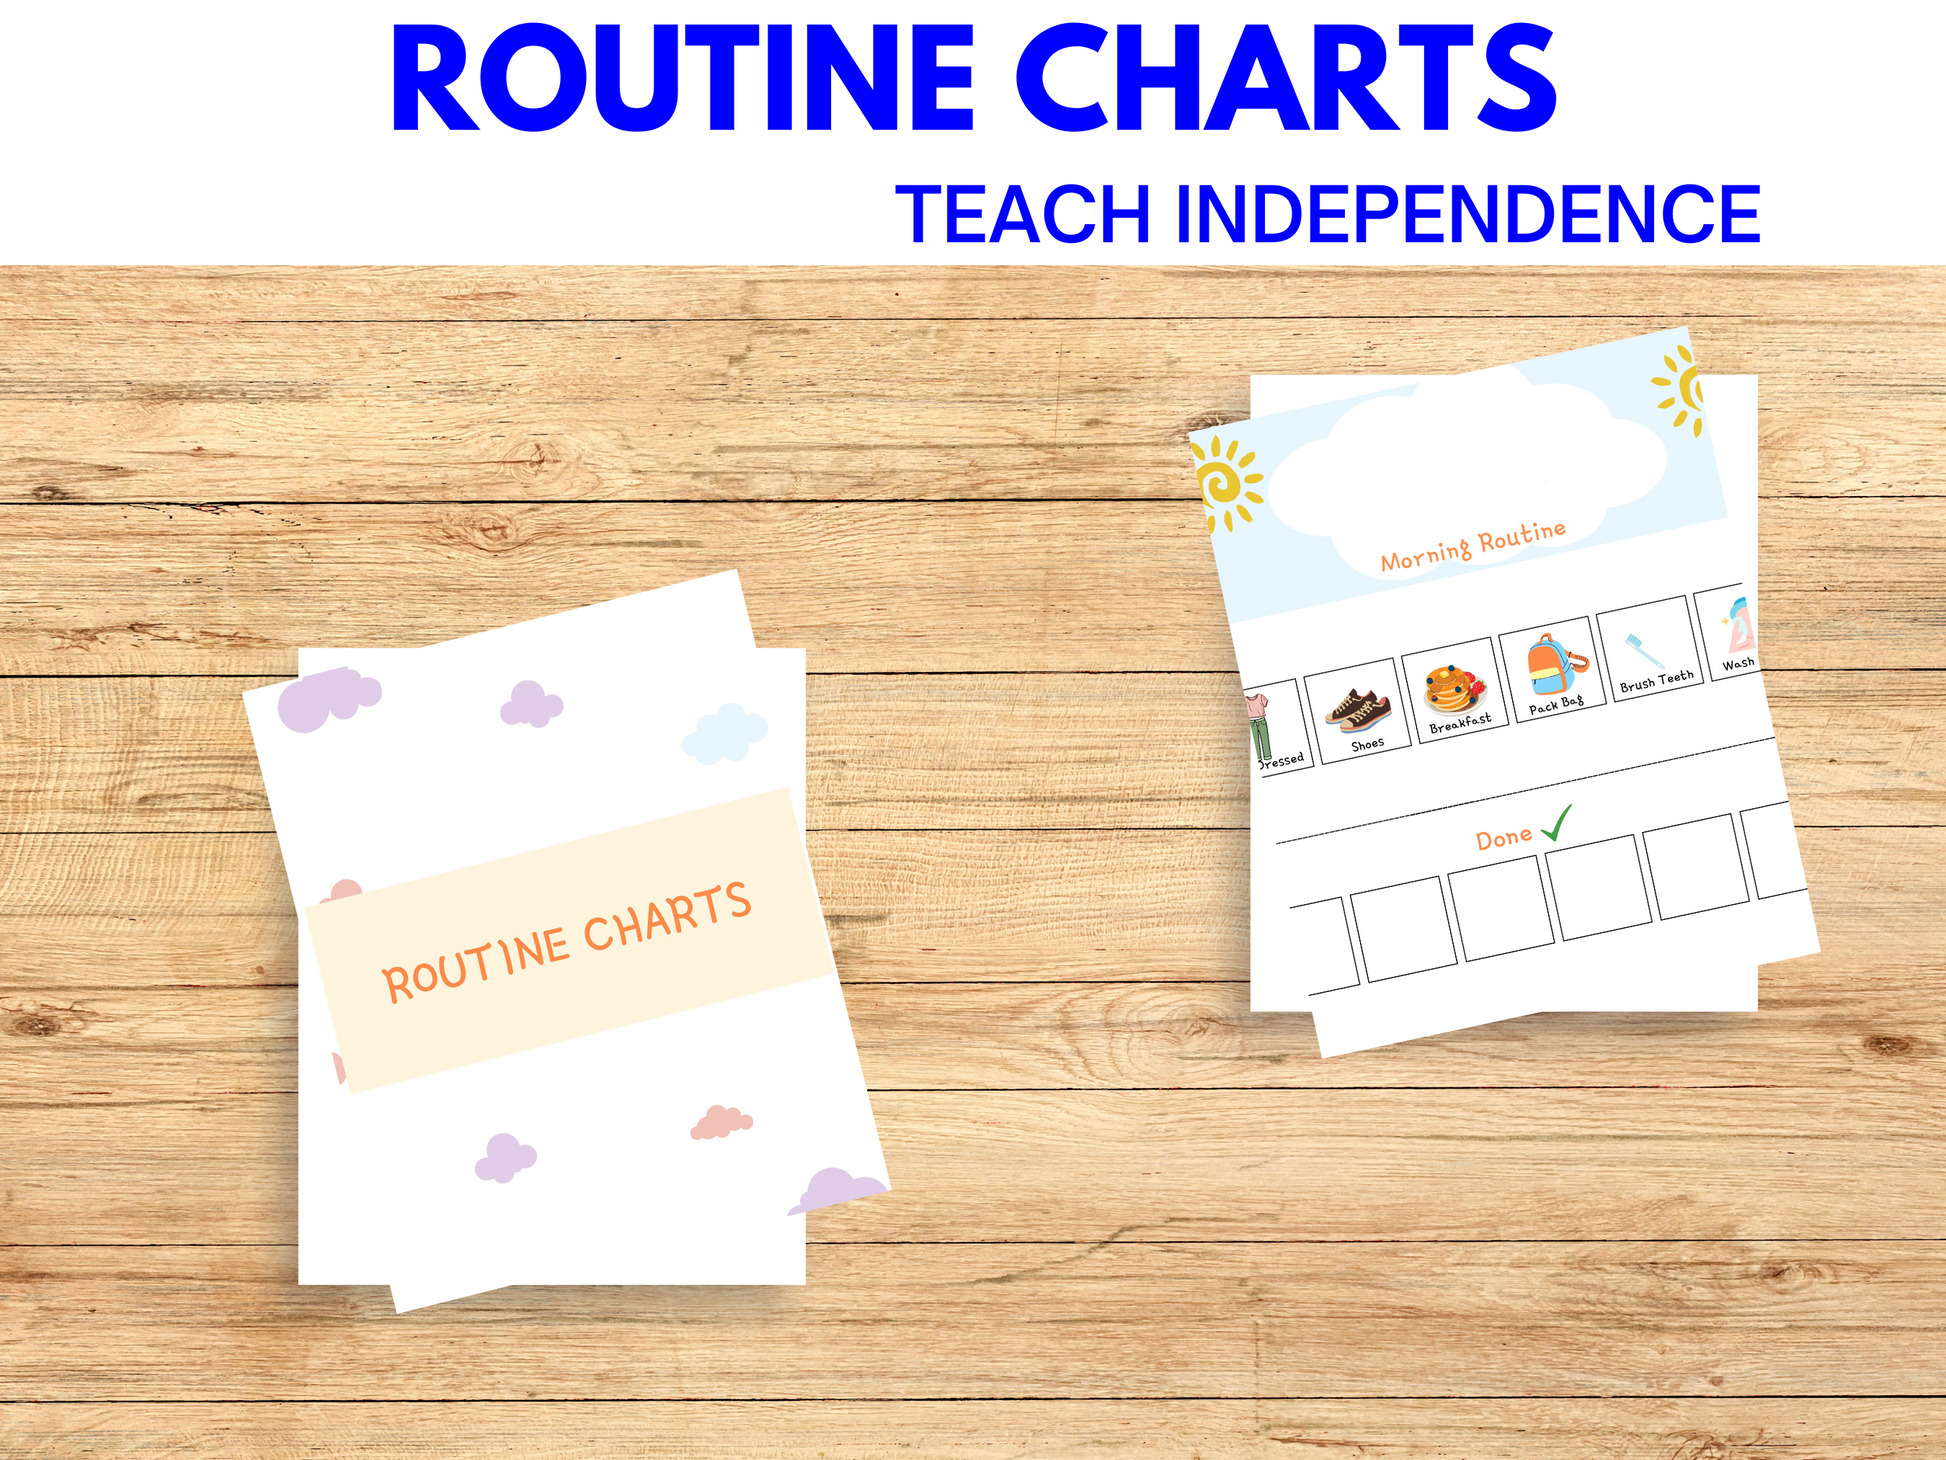 Routine chart cover page and morning routine chart.